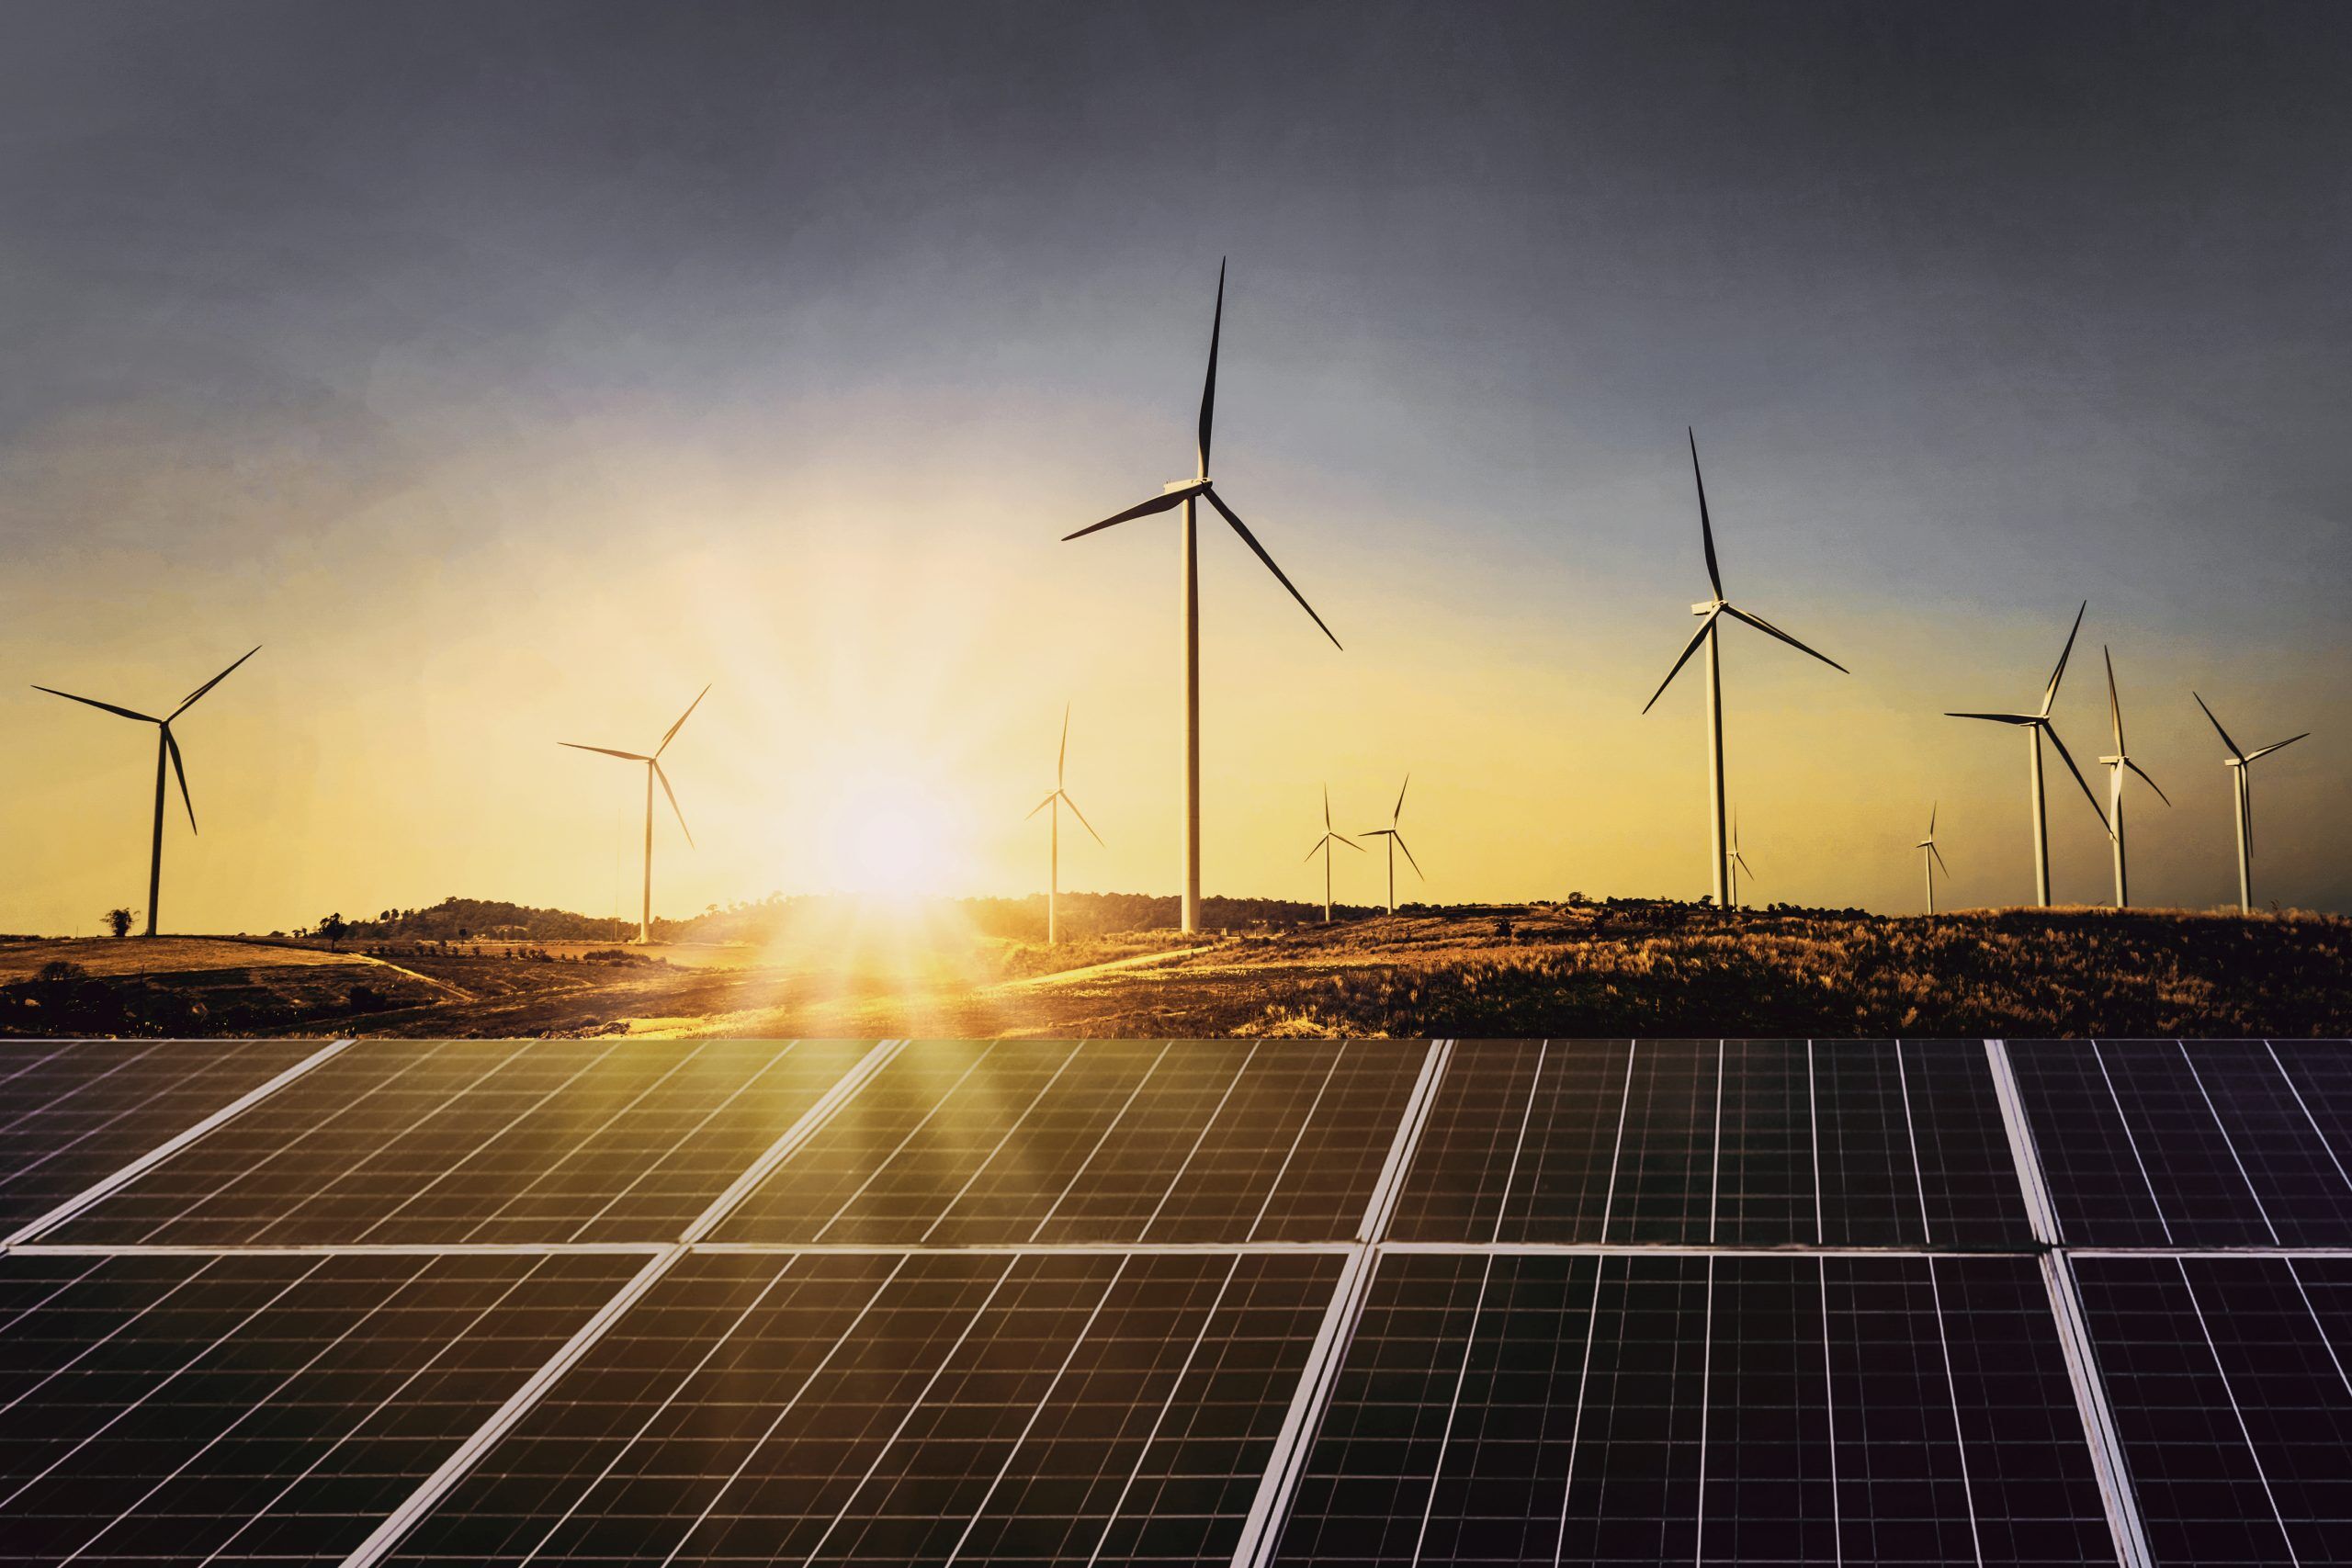 3.40 Trillion to be Invested Globally in Renewable Energy by 2030